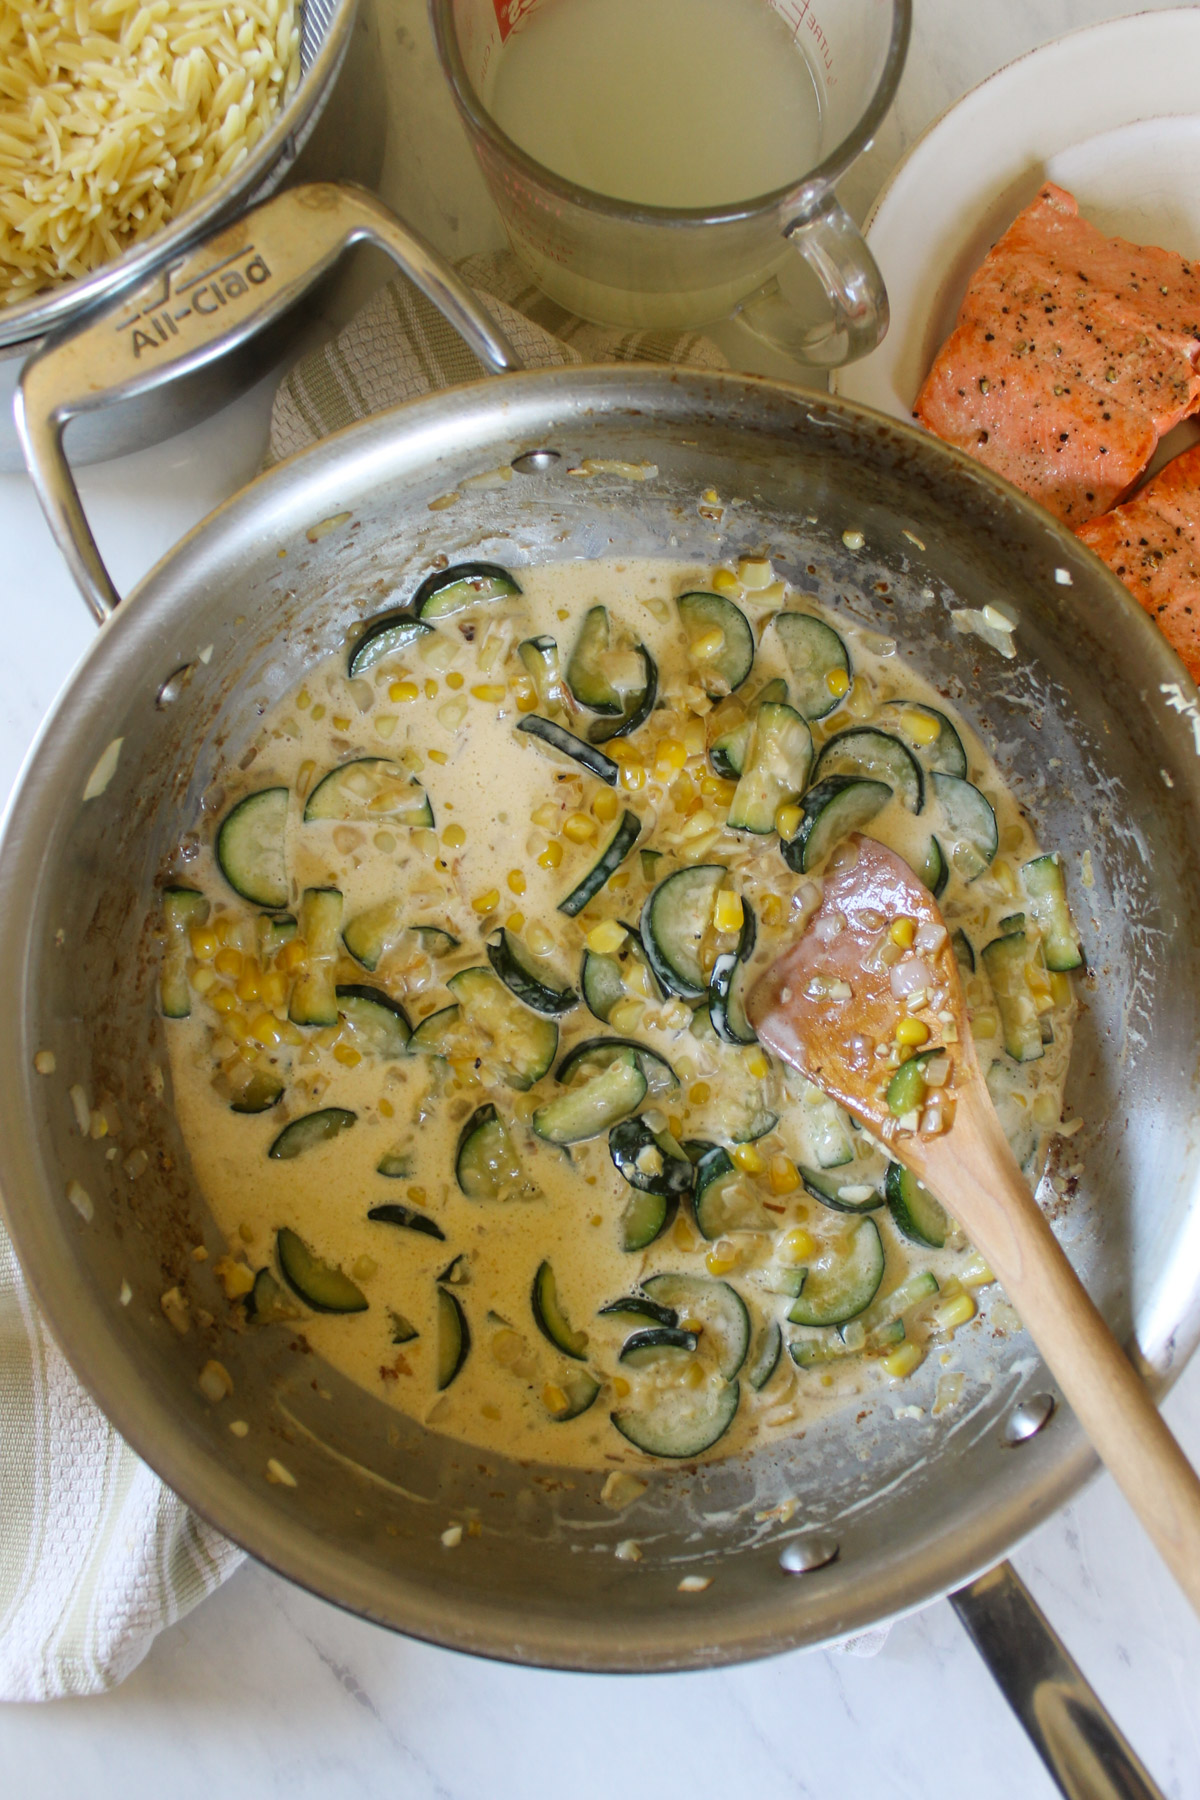 Cream added to zucchini and corn in a skillet to for a creamy white sauce.